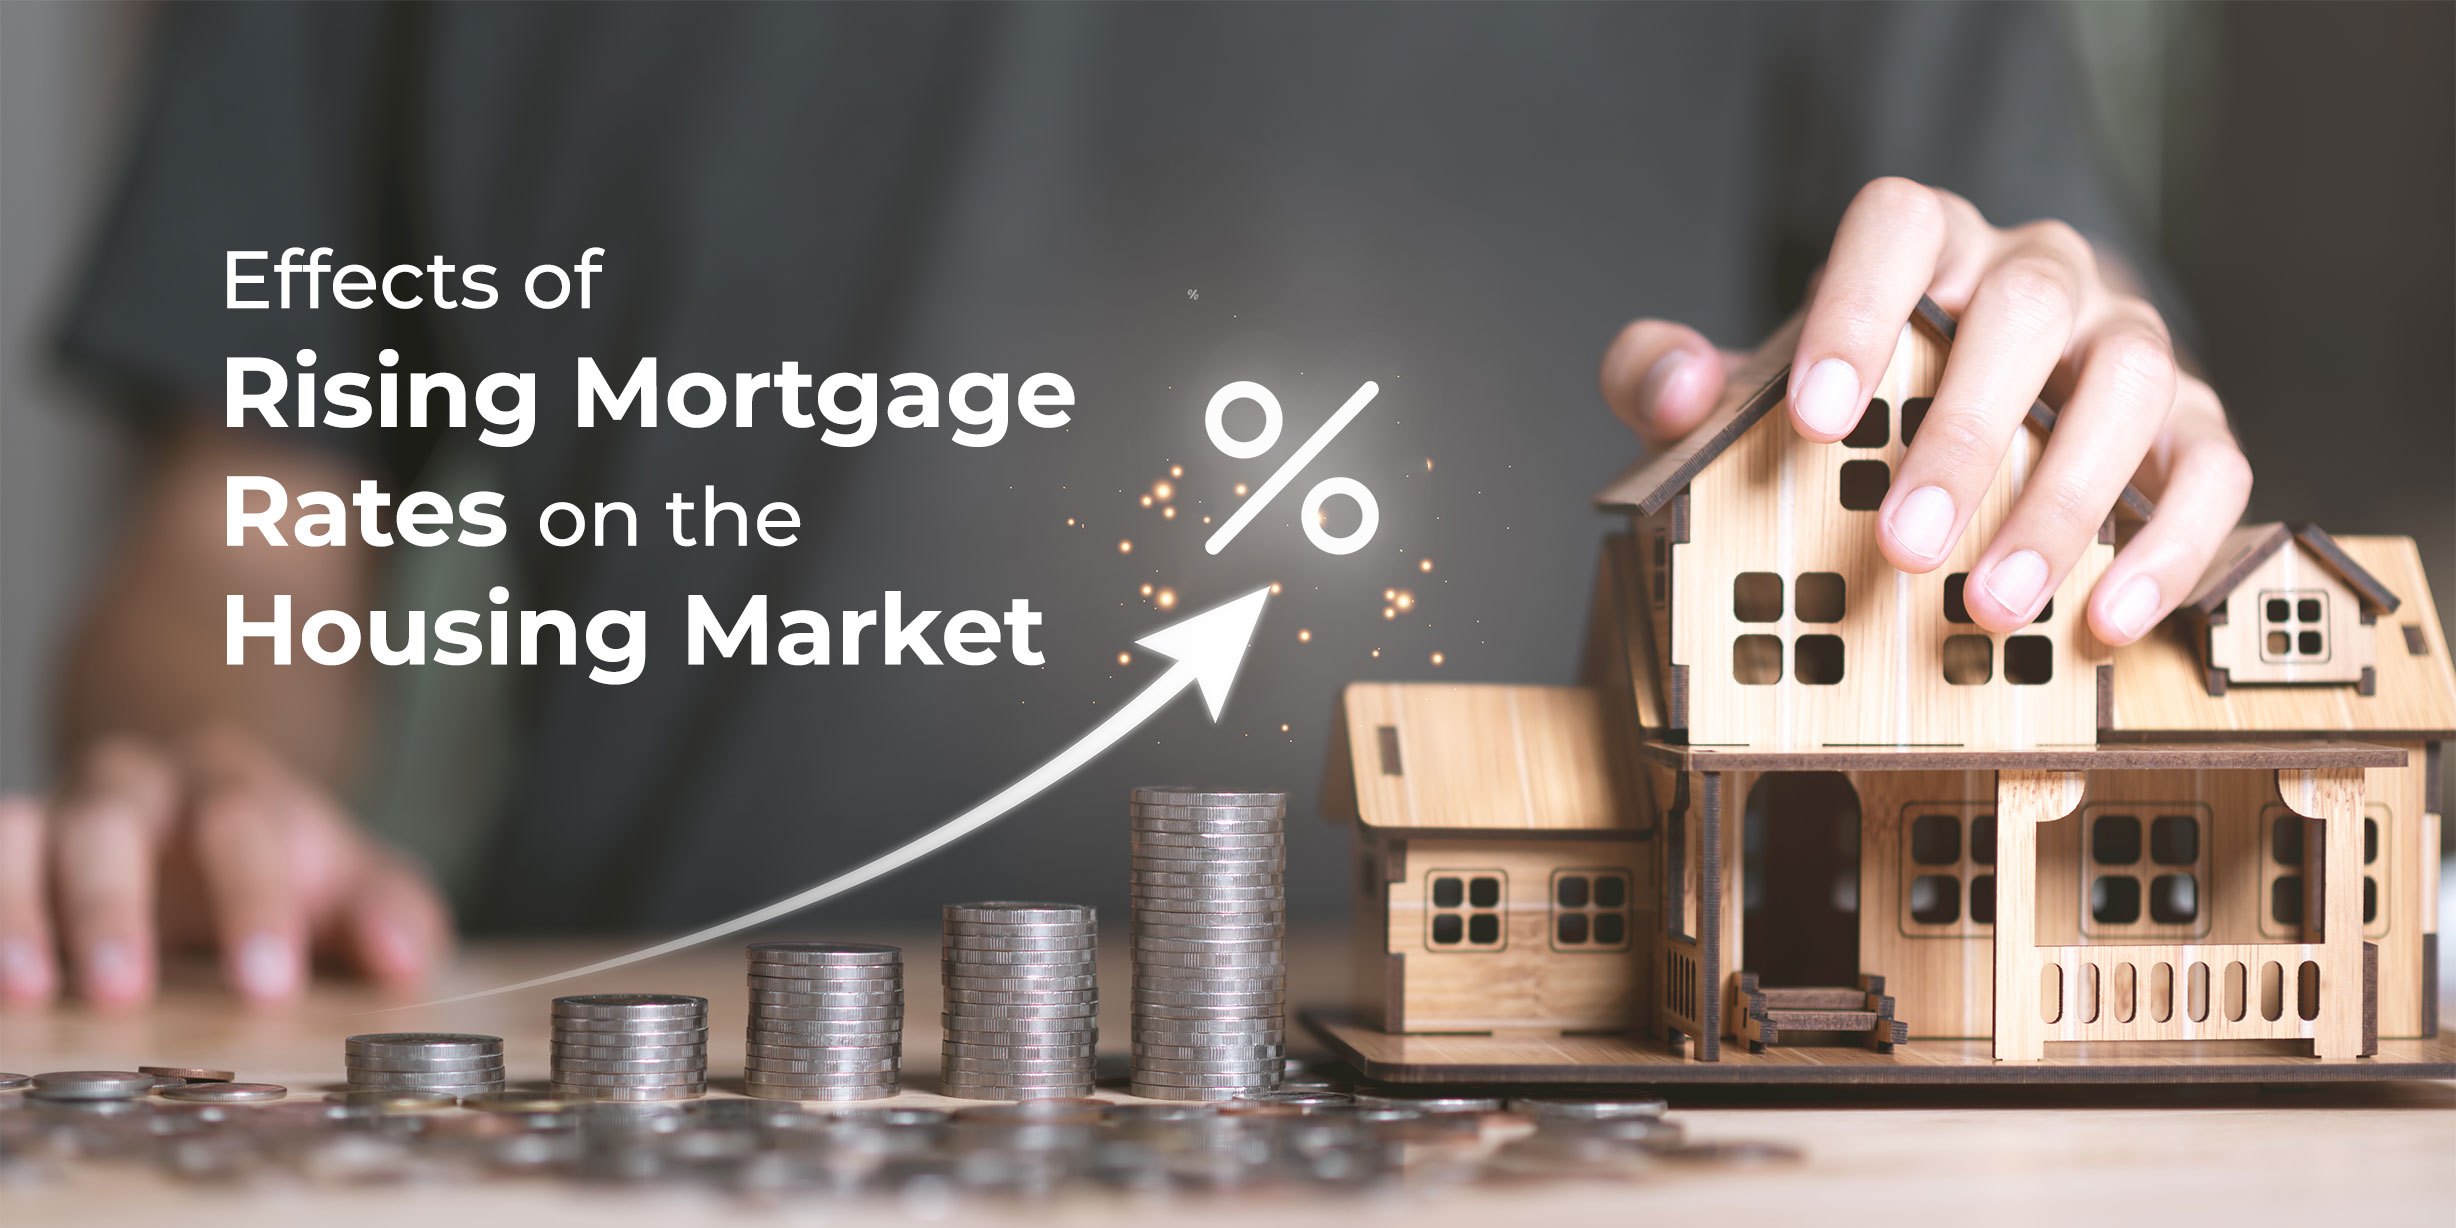 Effects of Rising Mortgage Rates on the Housing Market